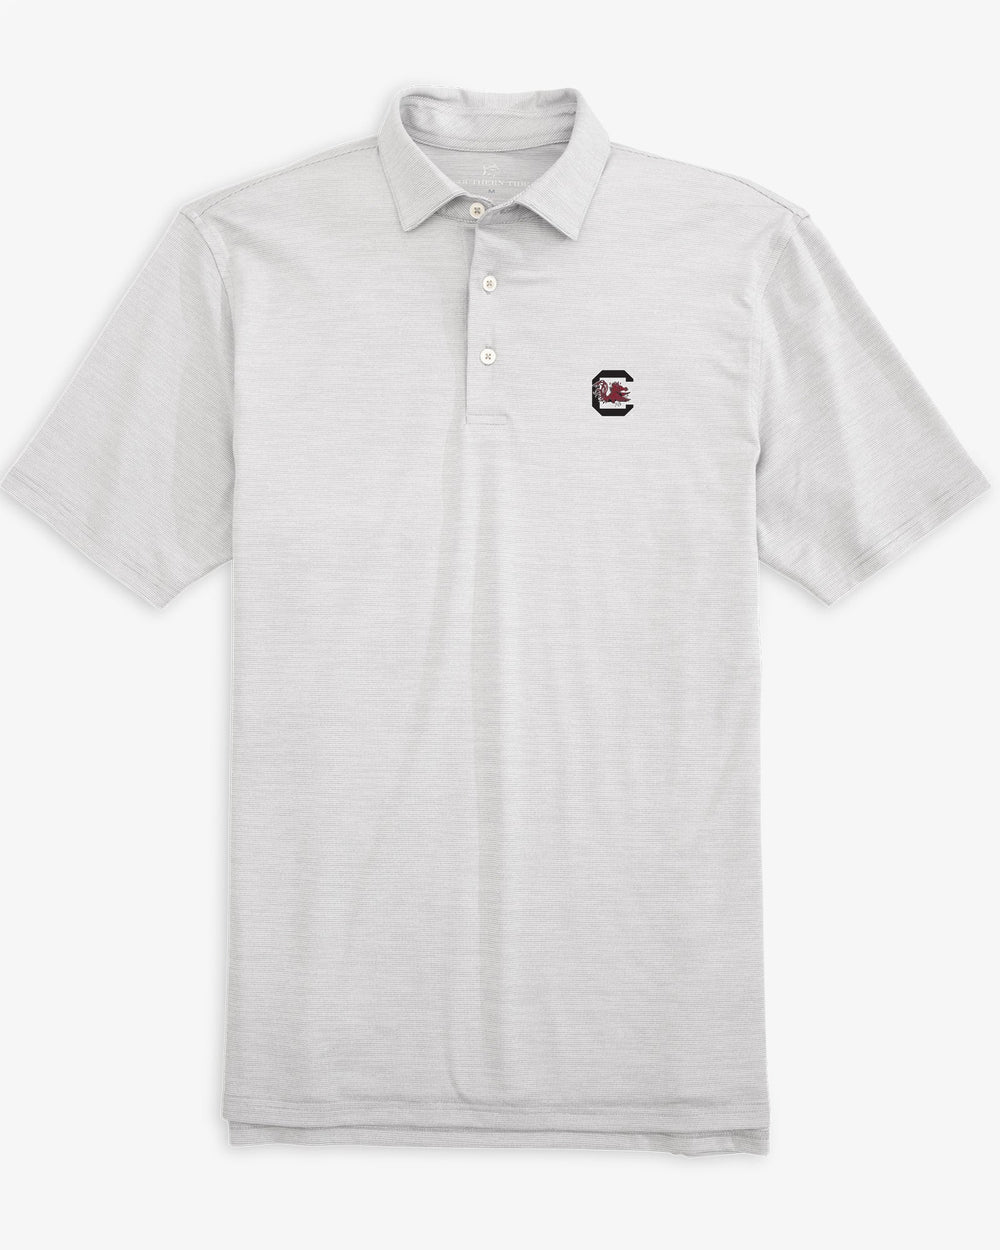 The front view of the South Carolina Driver Spacedye Polo Shirt by Southern Tide - Slate Grey